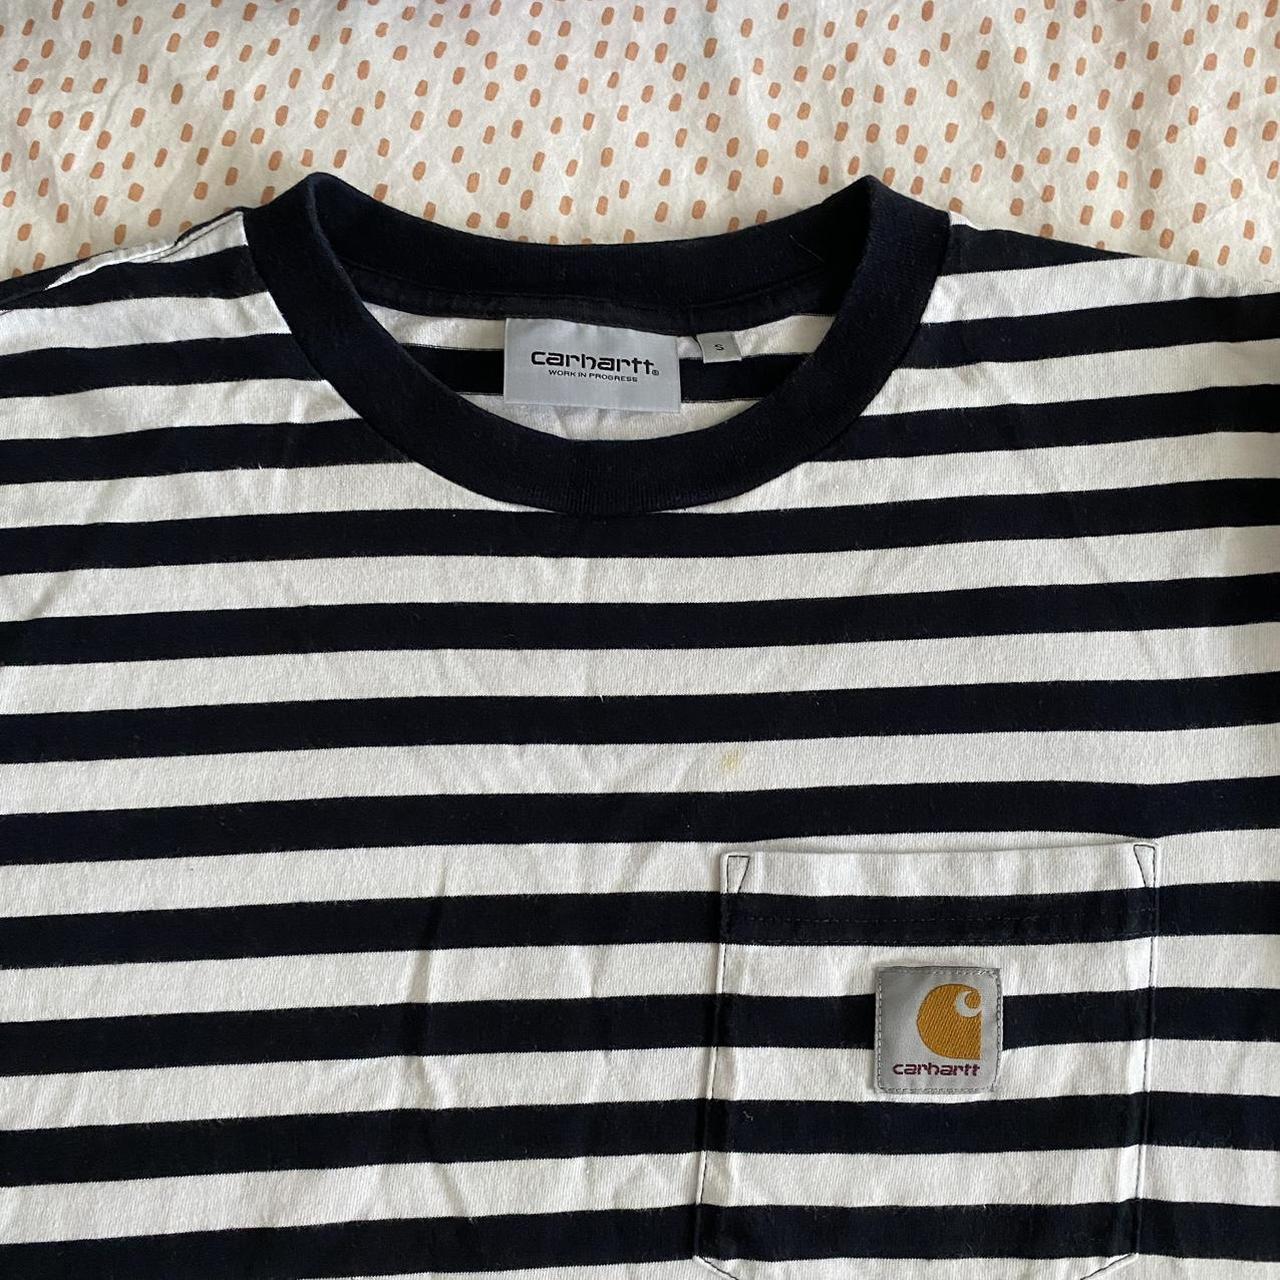 Carhartt t shirt striped in navy and white - Depop